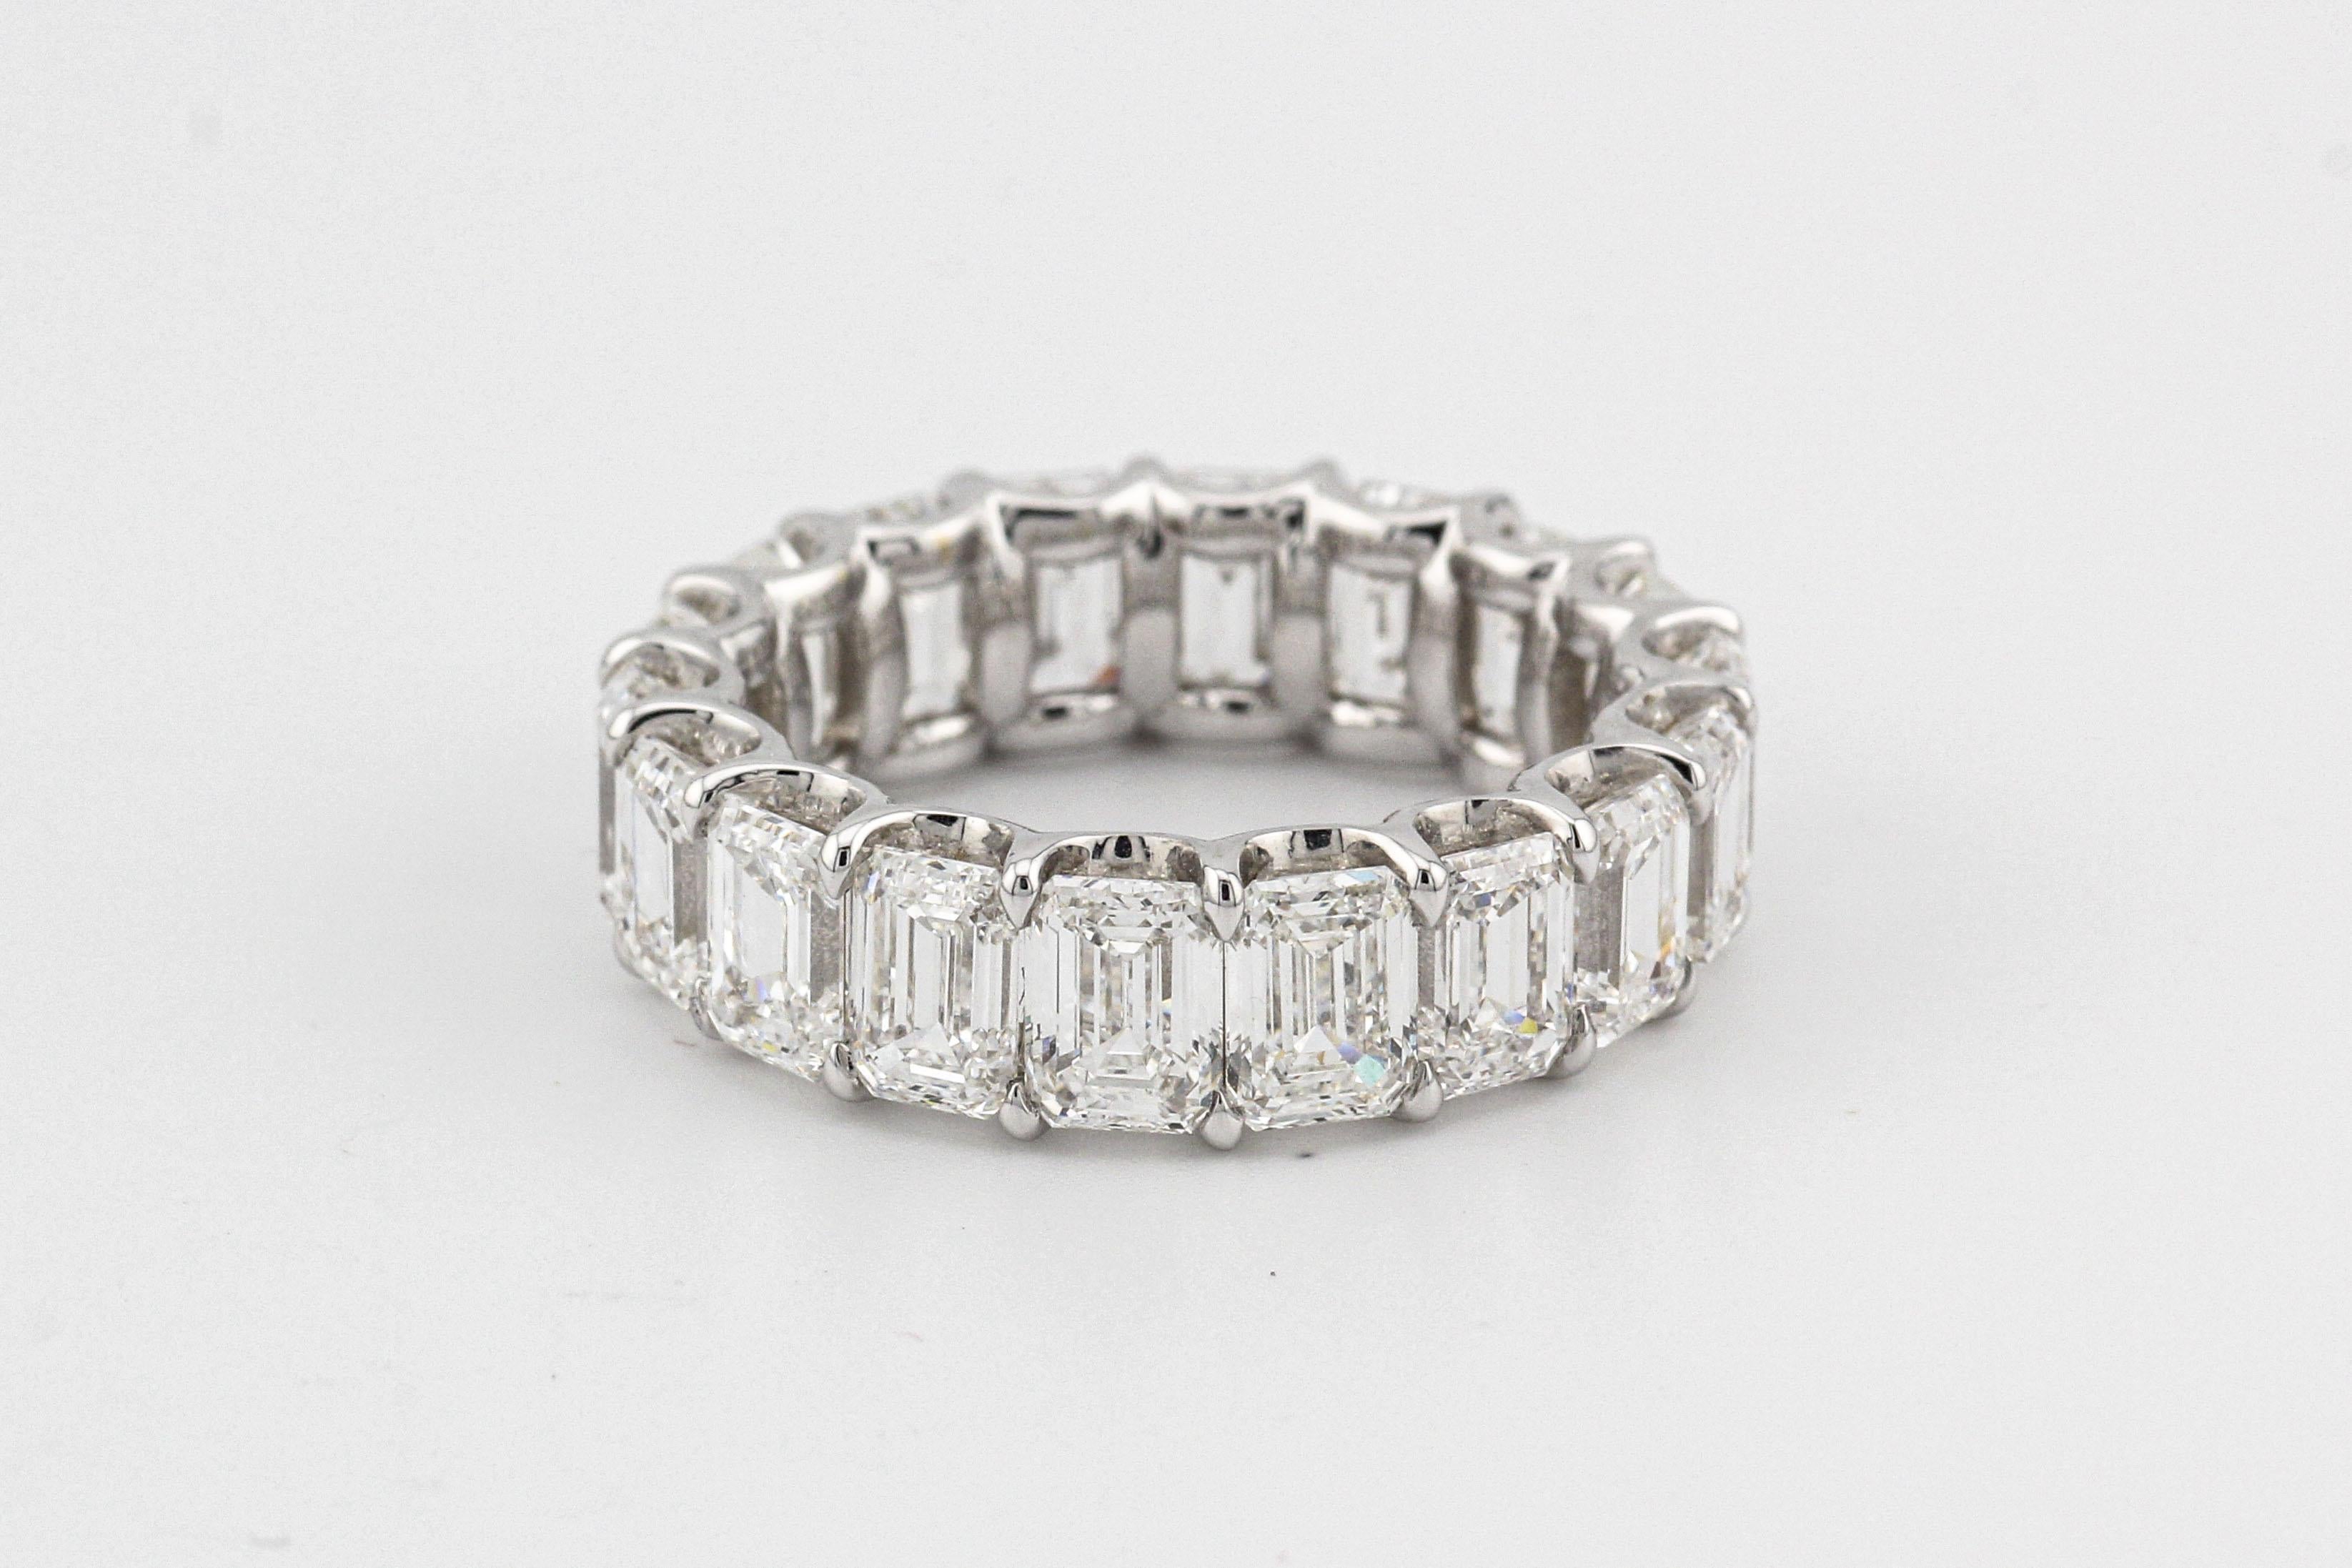 Exceptional GIA D-F IF-VVS2 9.01 cts Emerald Cut Diamond 18k White Gold Band 6.5 In Excellent Condition For Sale In Bellmore, NY